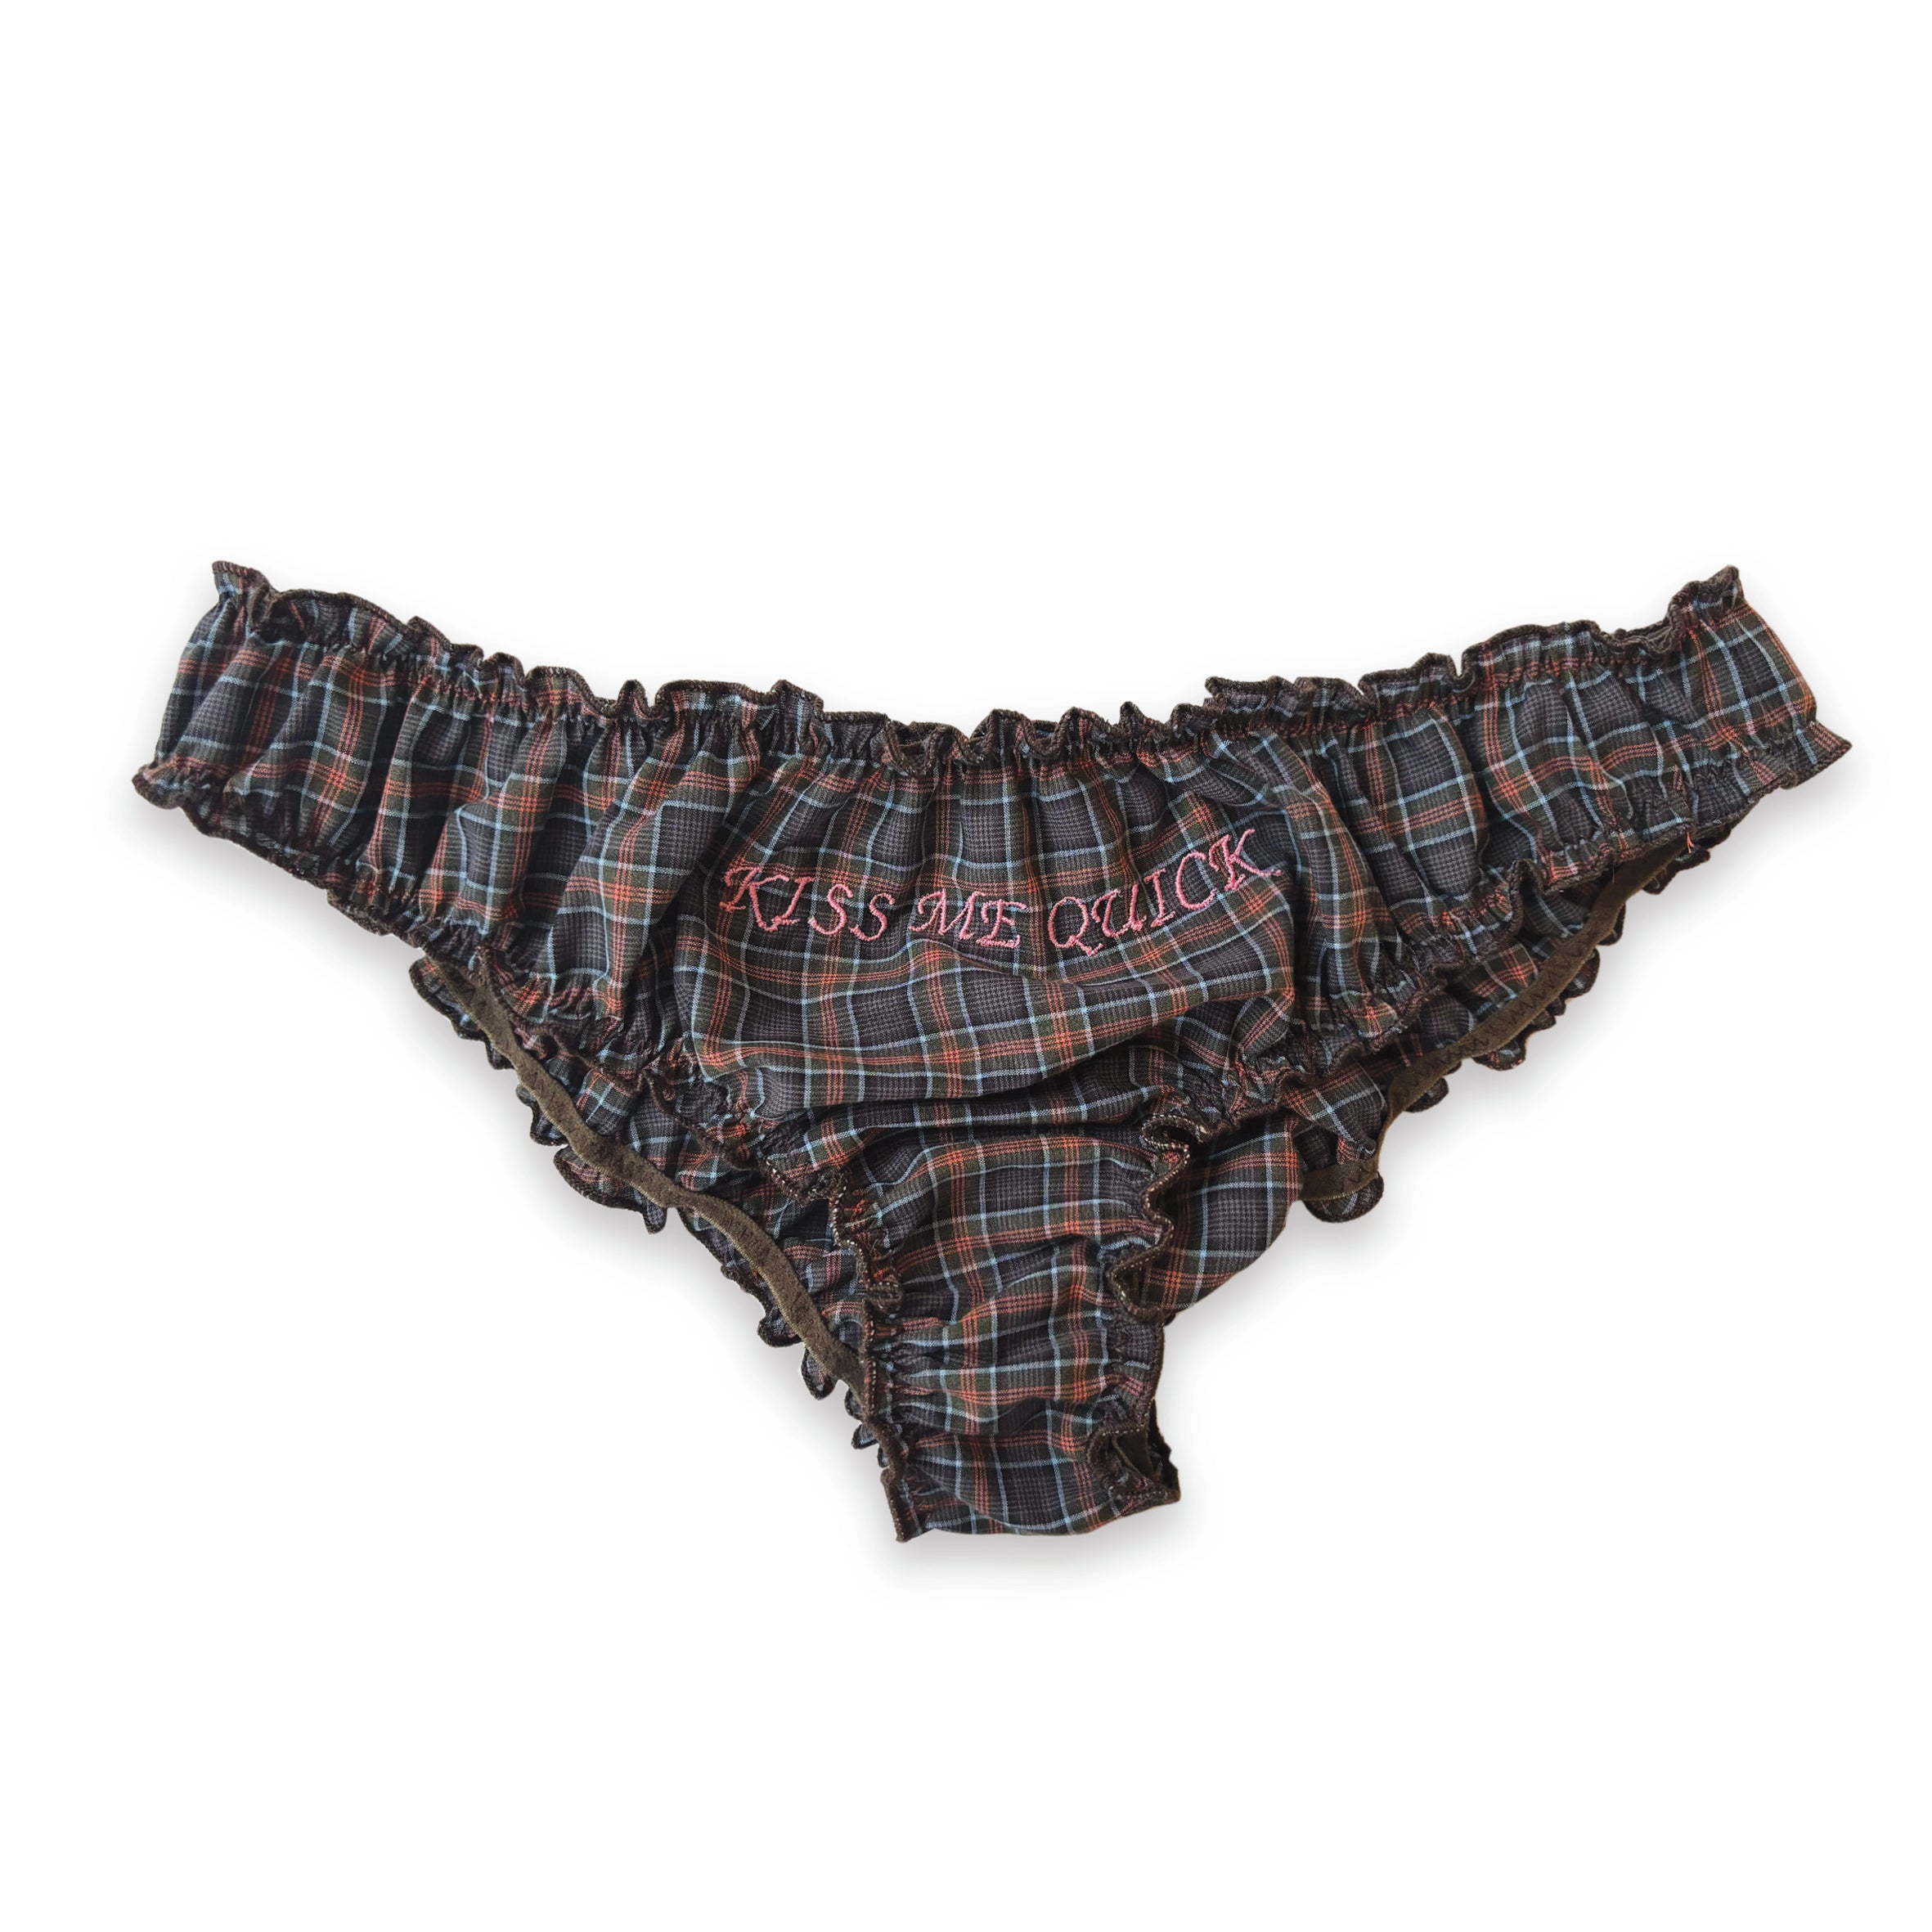 KISS ME QUICK Ruffle Knickers – This Belongs To